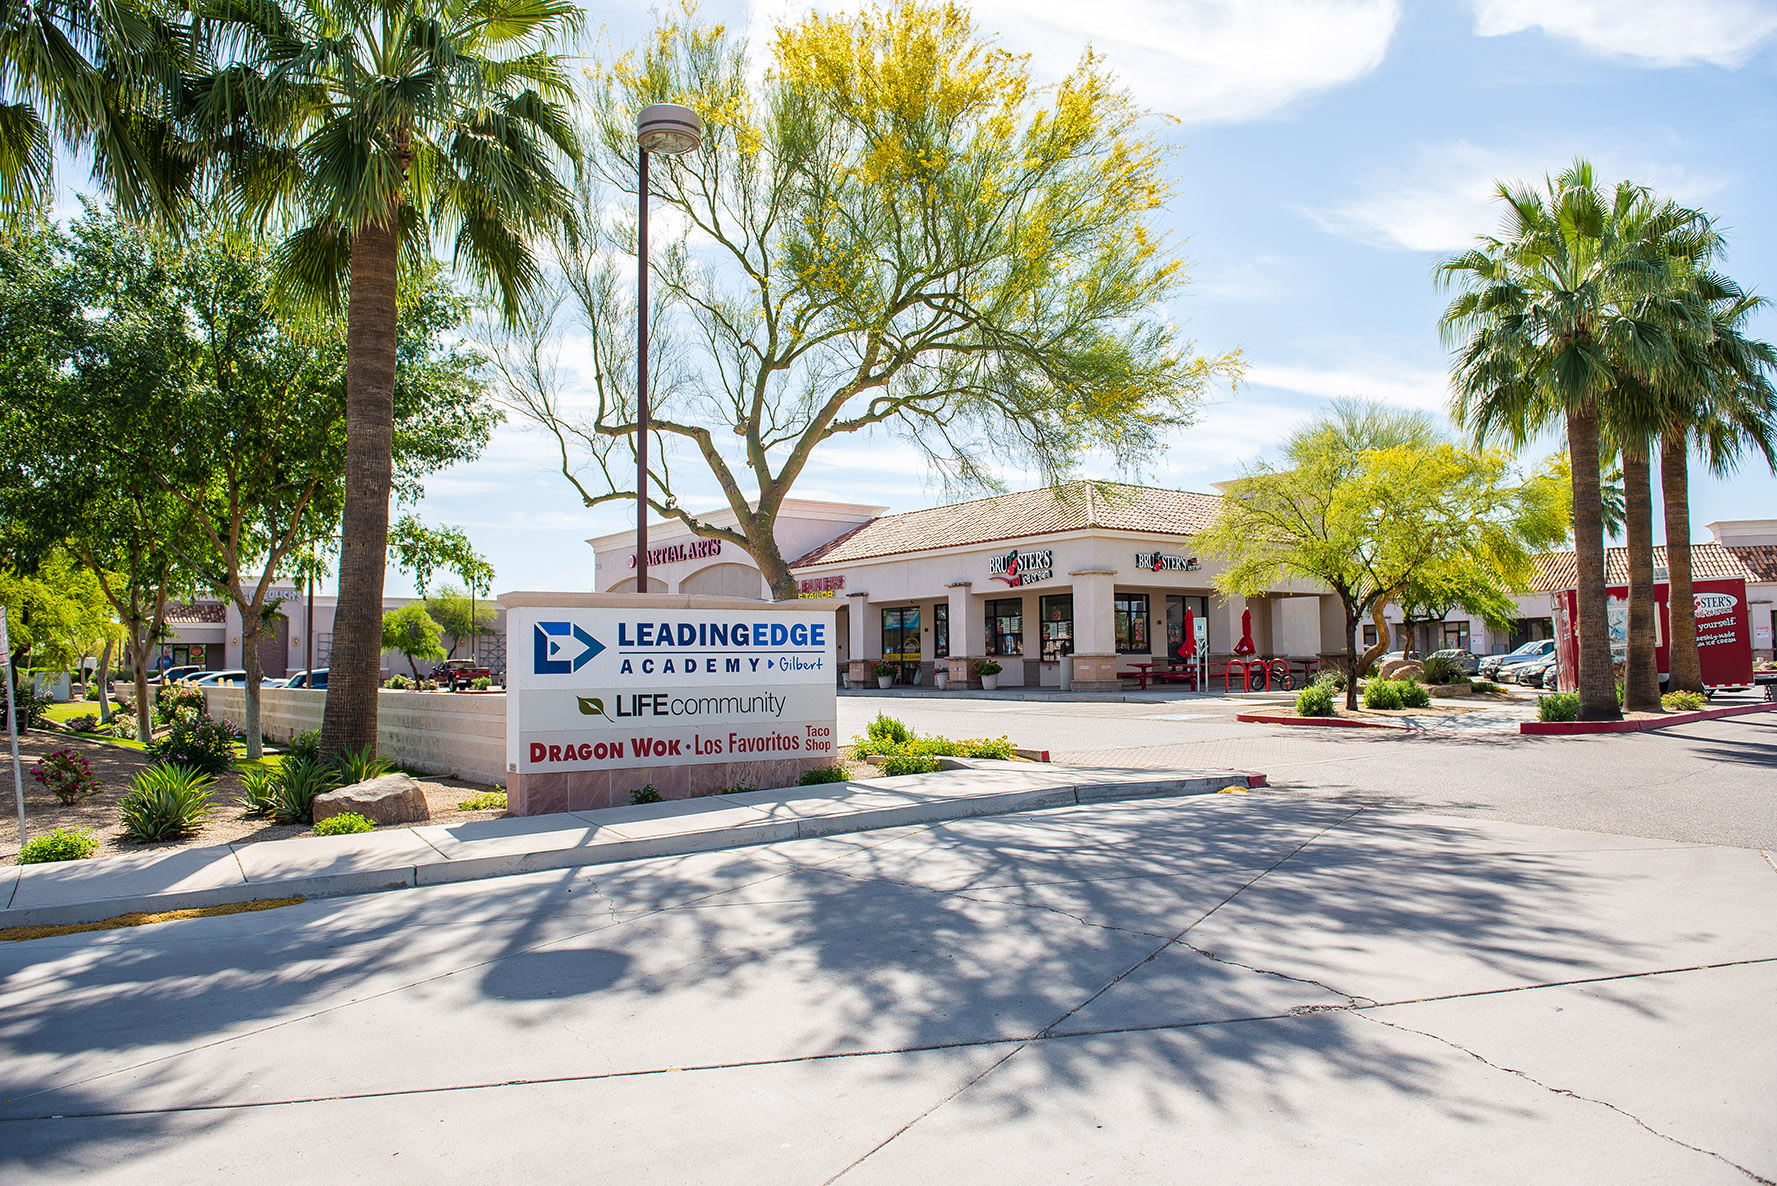 Velocity Retail Group’s Investment Division Completes Multi-Million Dollar Investment Sale of Cooper Square in Gilbert, Arizona 5